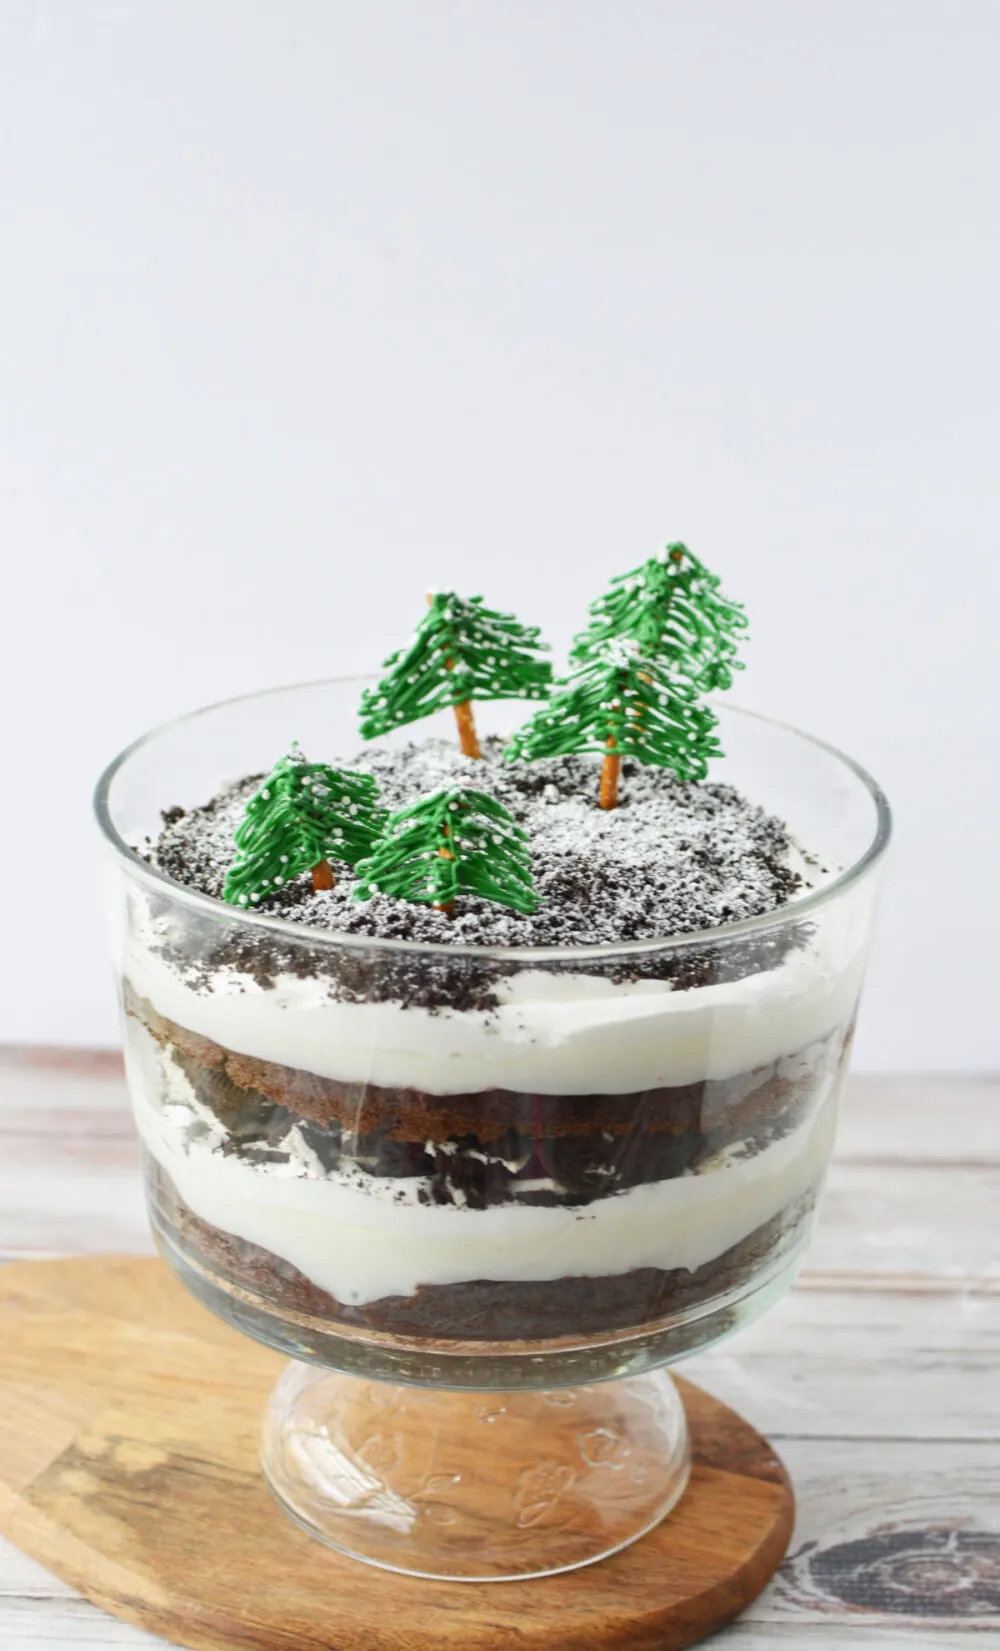 Chocolate winter trifle with green trees on top.